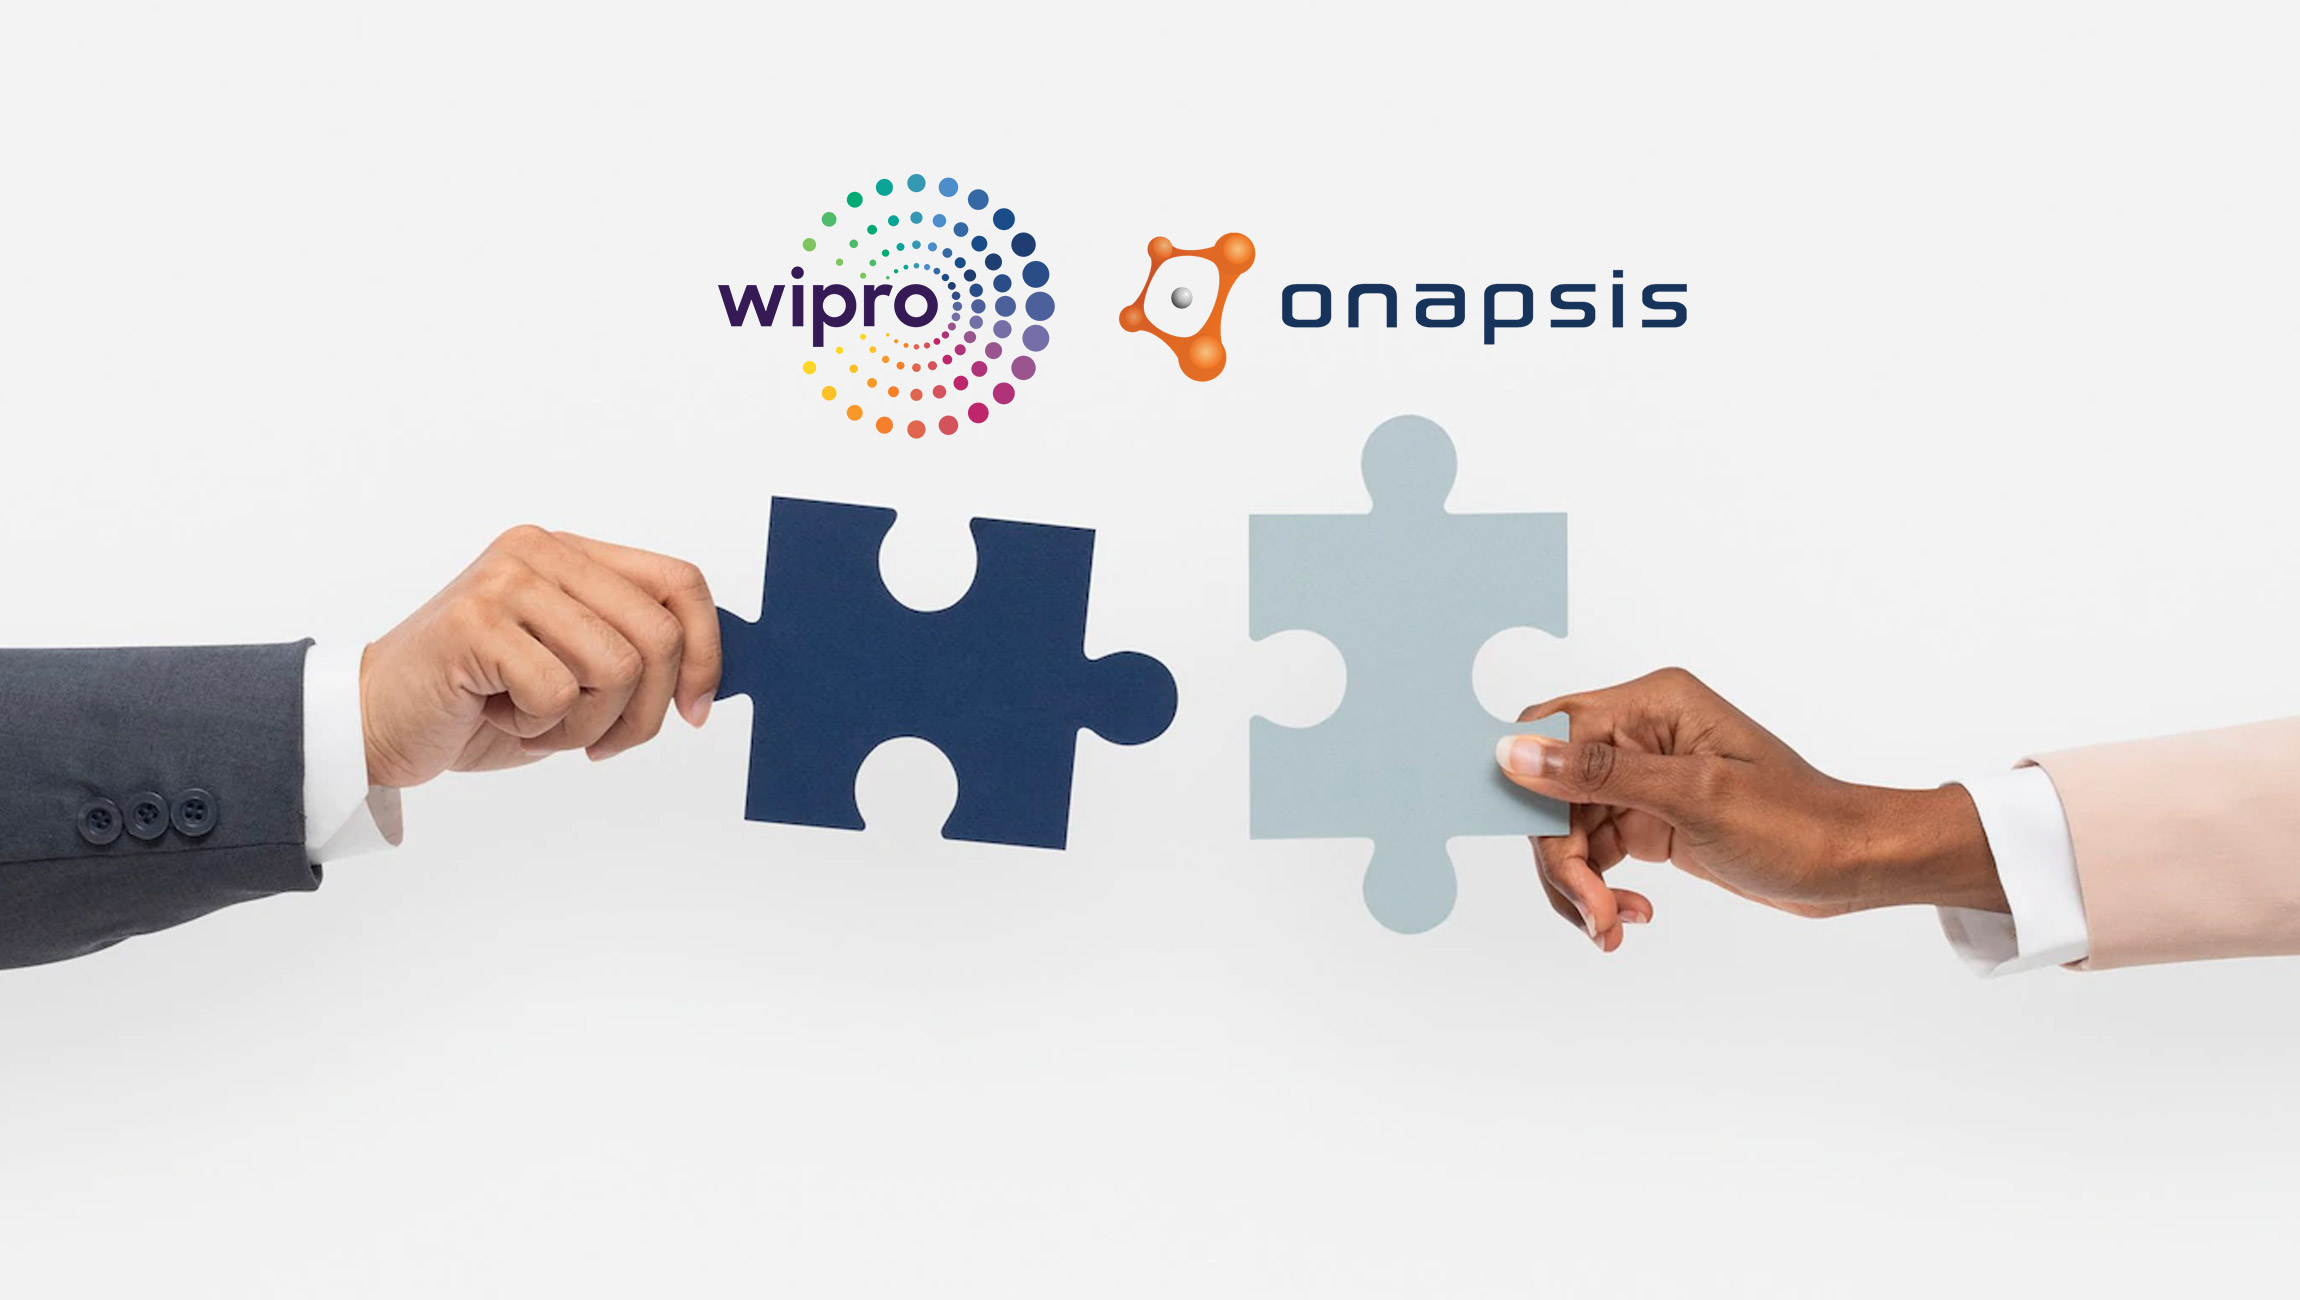 Onapsis Announces Collaboration with Wipro to Remove Security as a Digital Transformation Roadblock